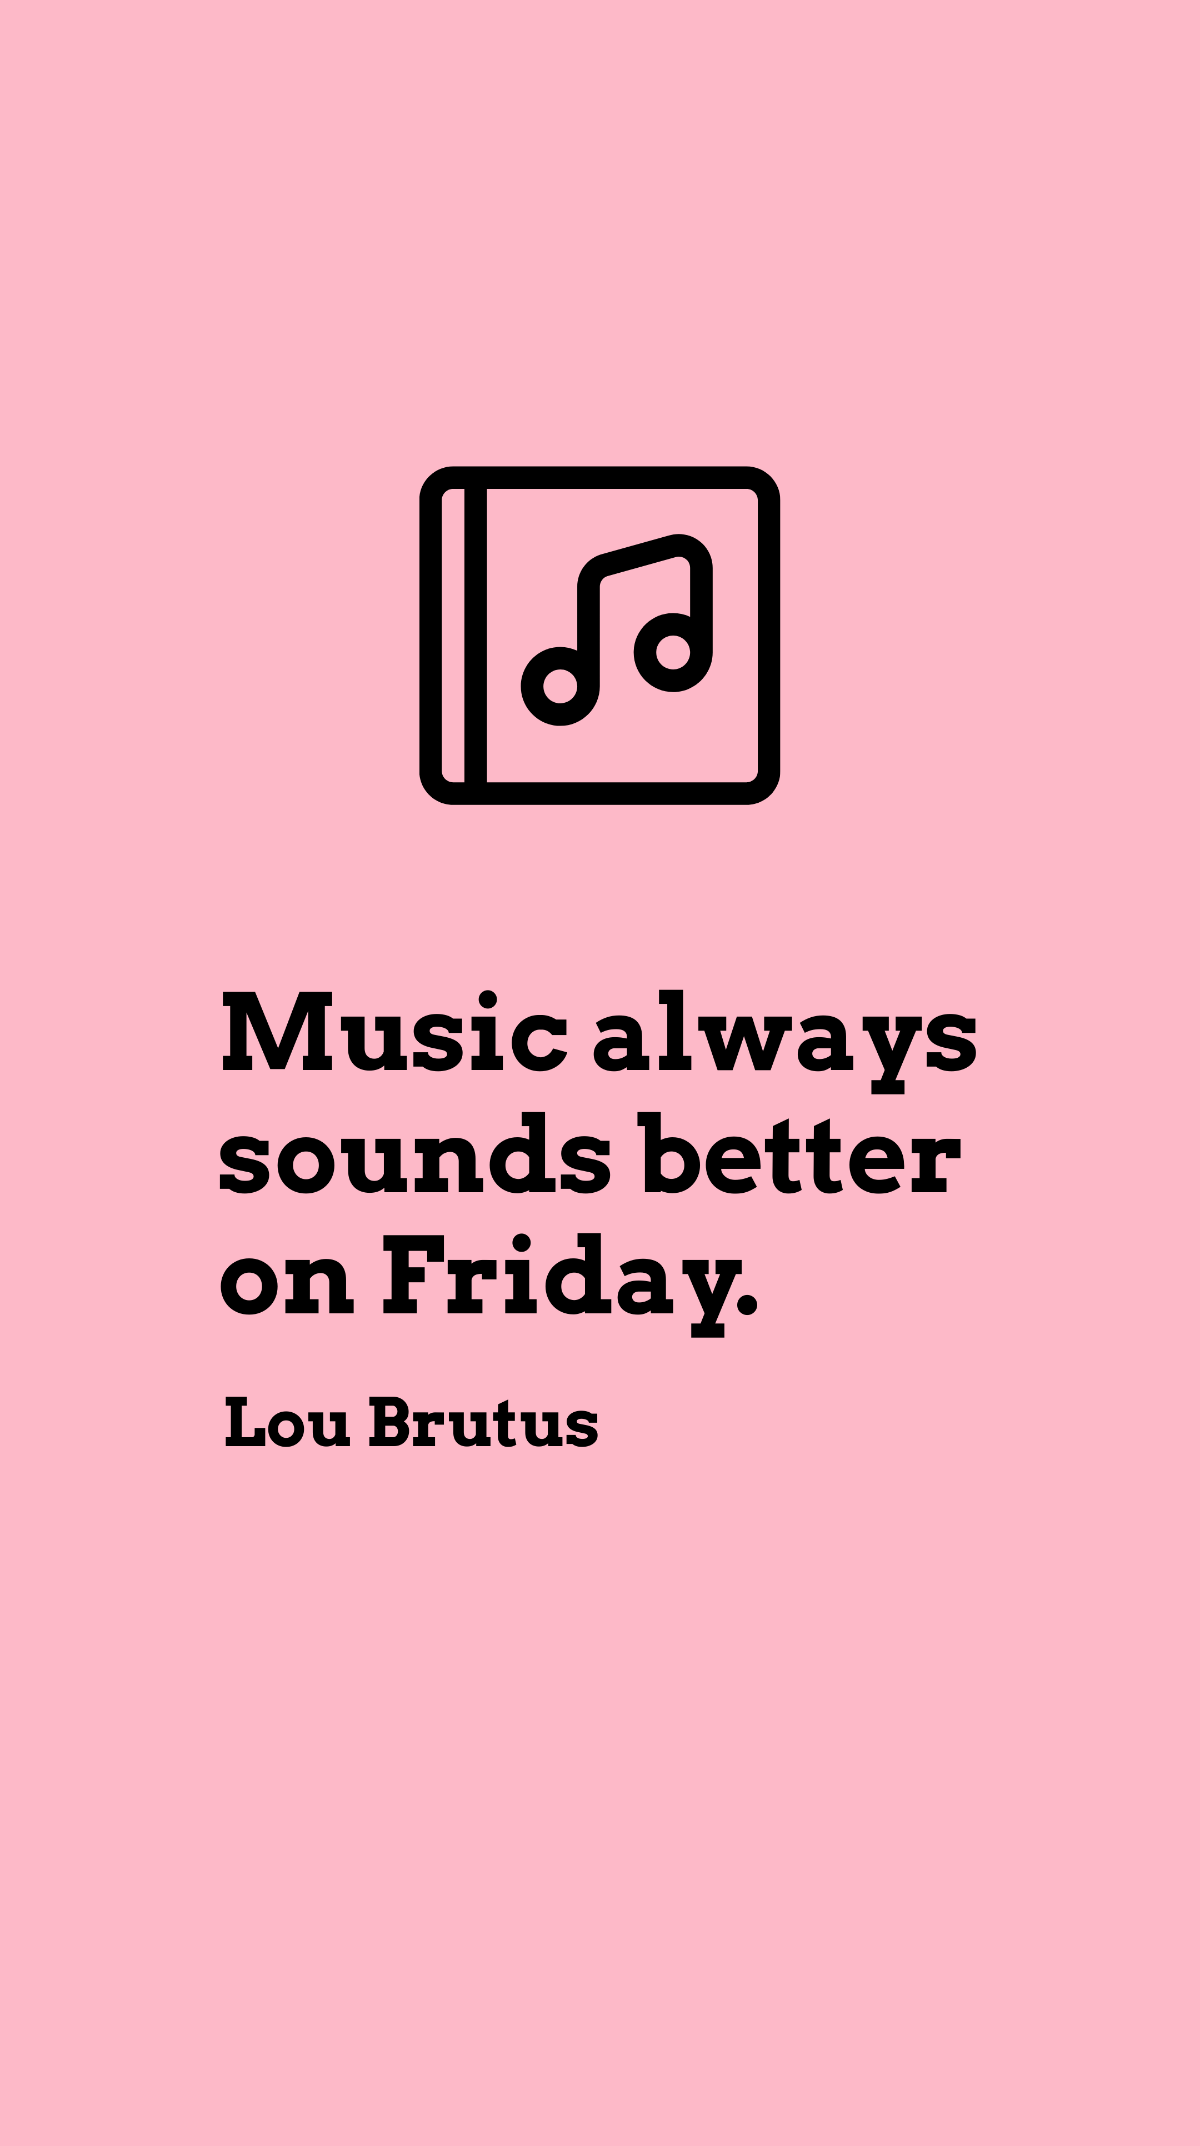 Lou Brutus - Music always sounds better on Friday. Template